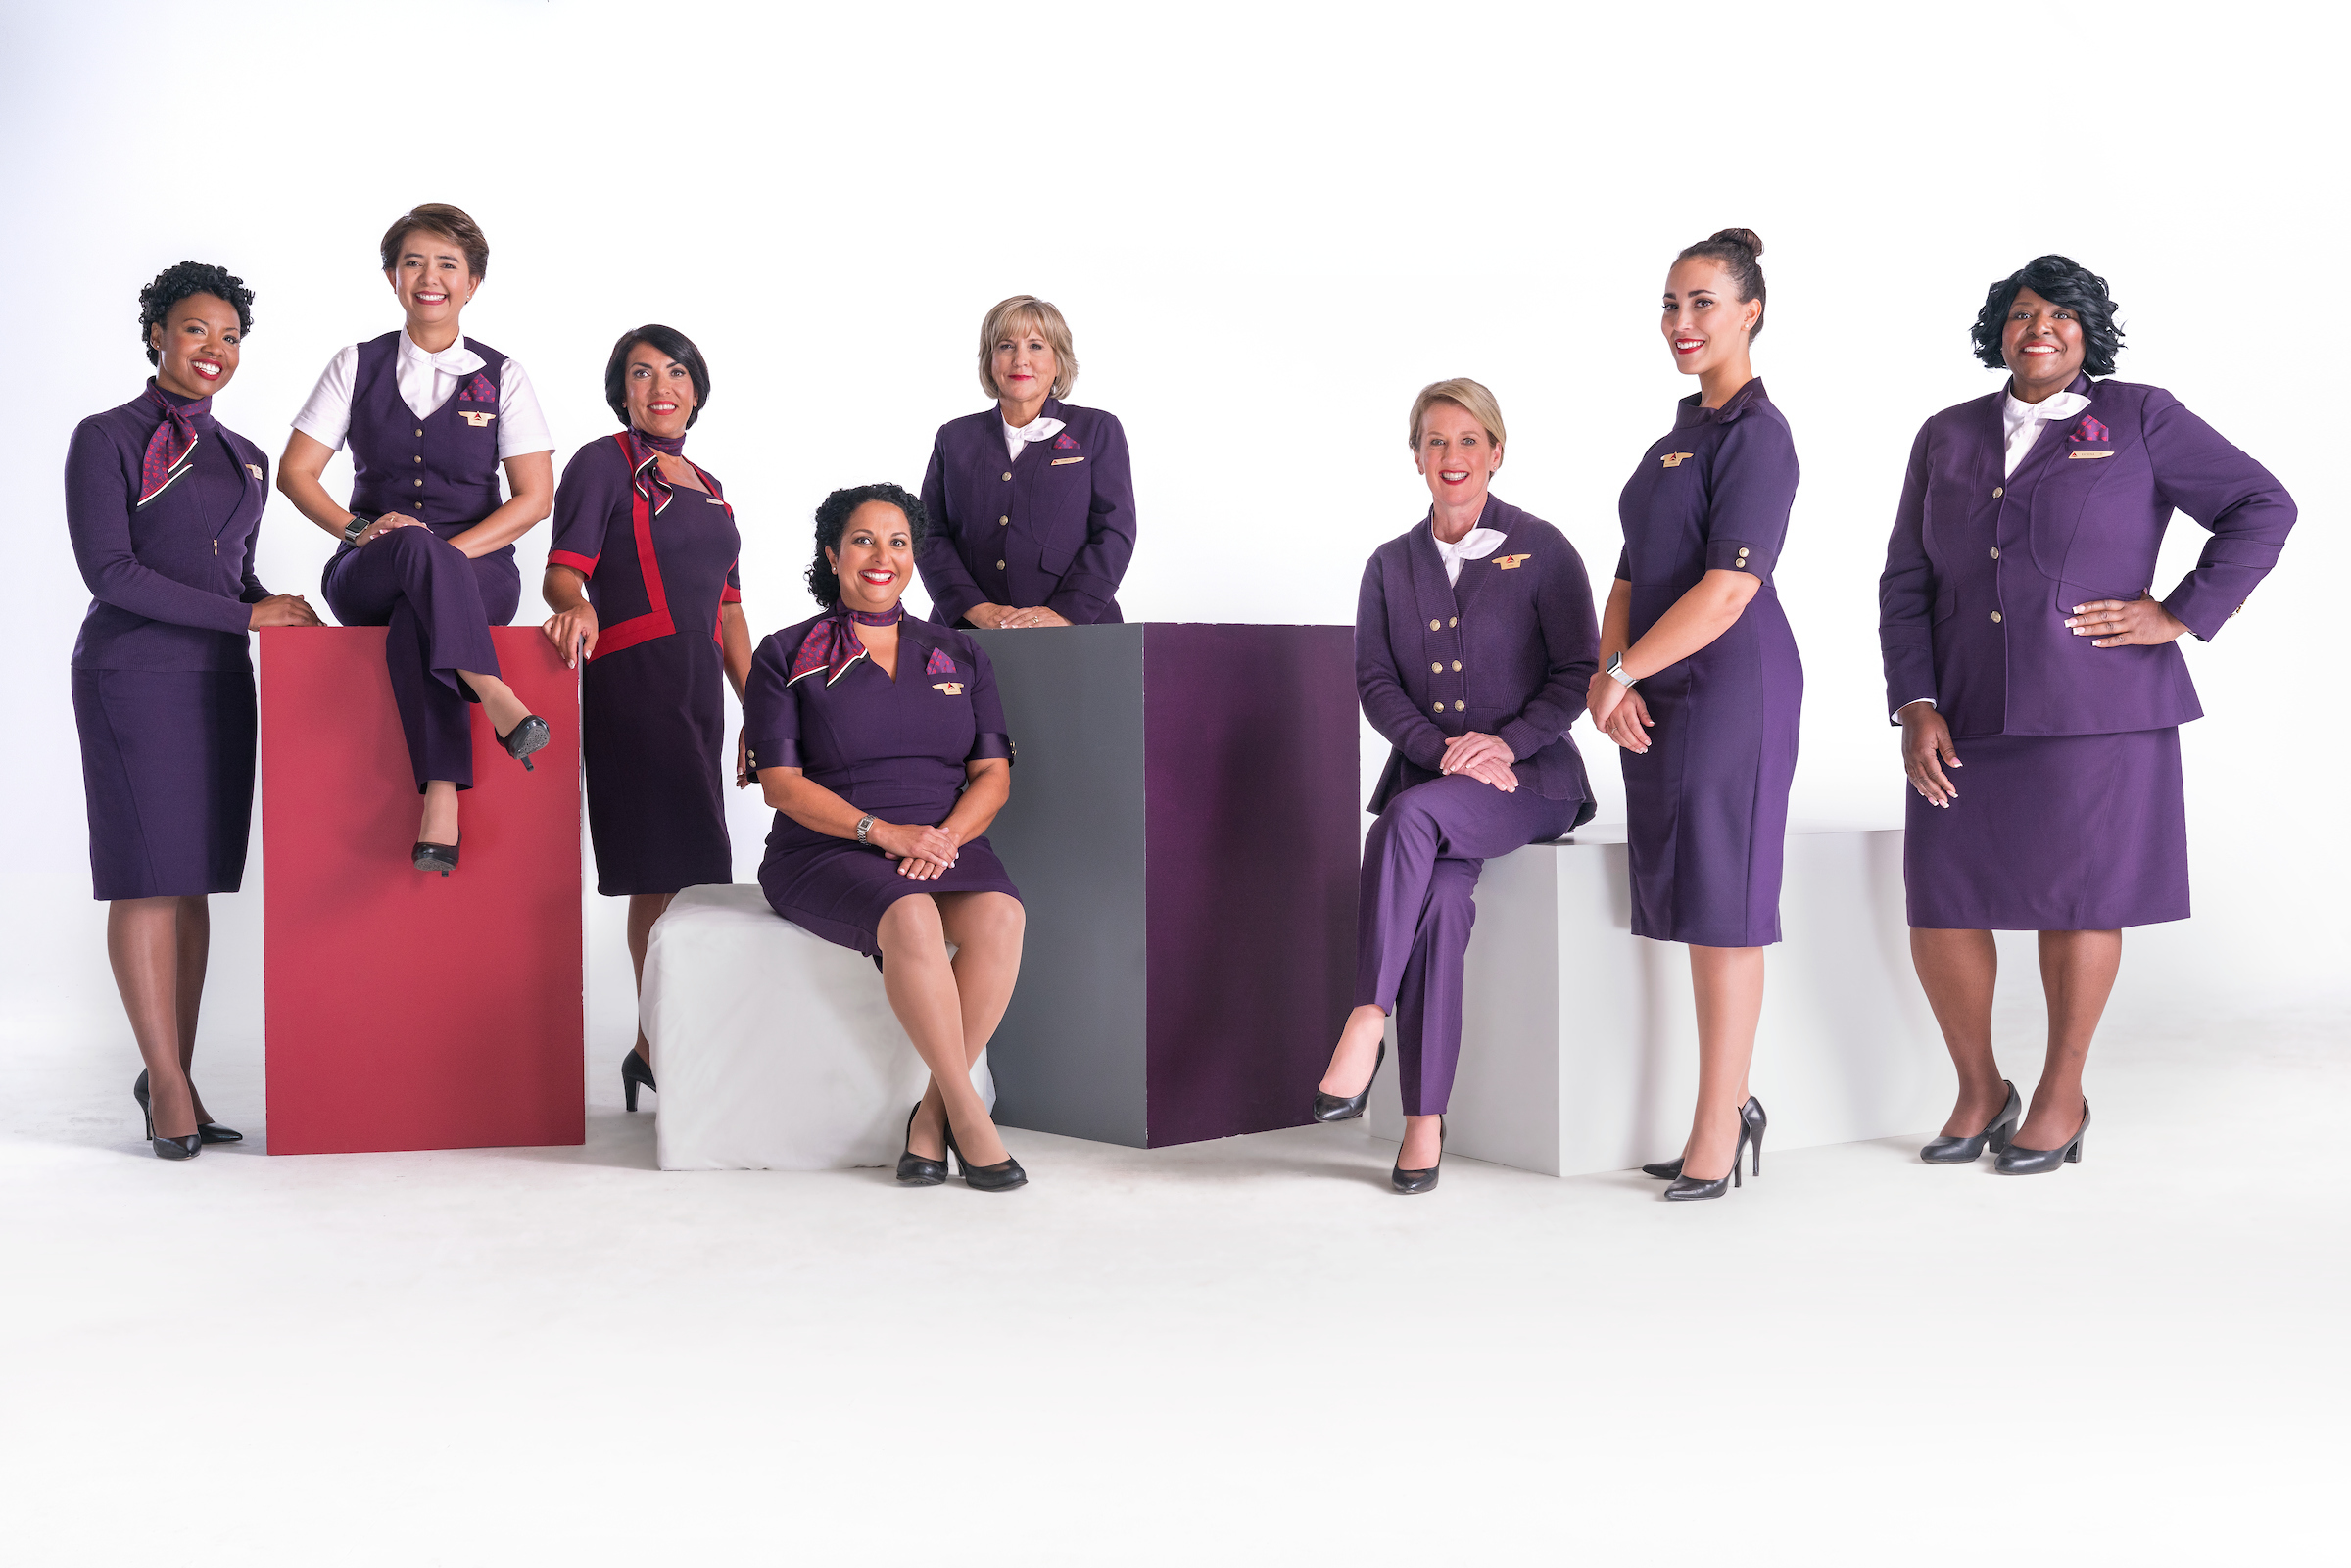 some-delta-employees-sickened-by-plum-uniforms-will-run-for-miles